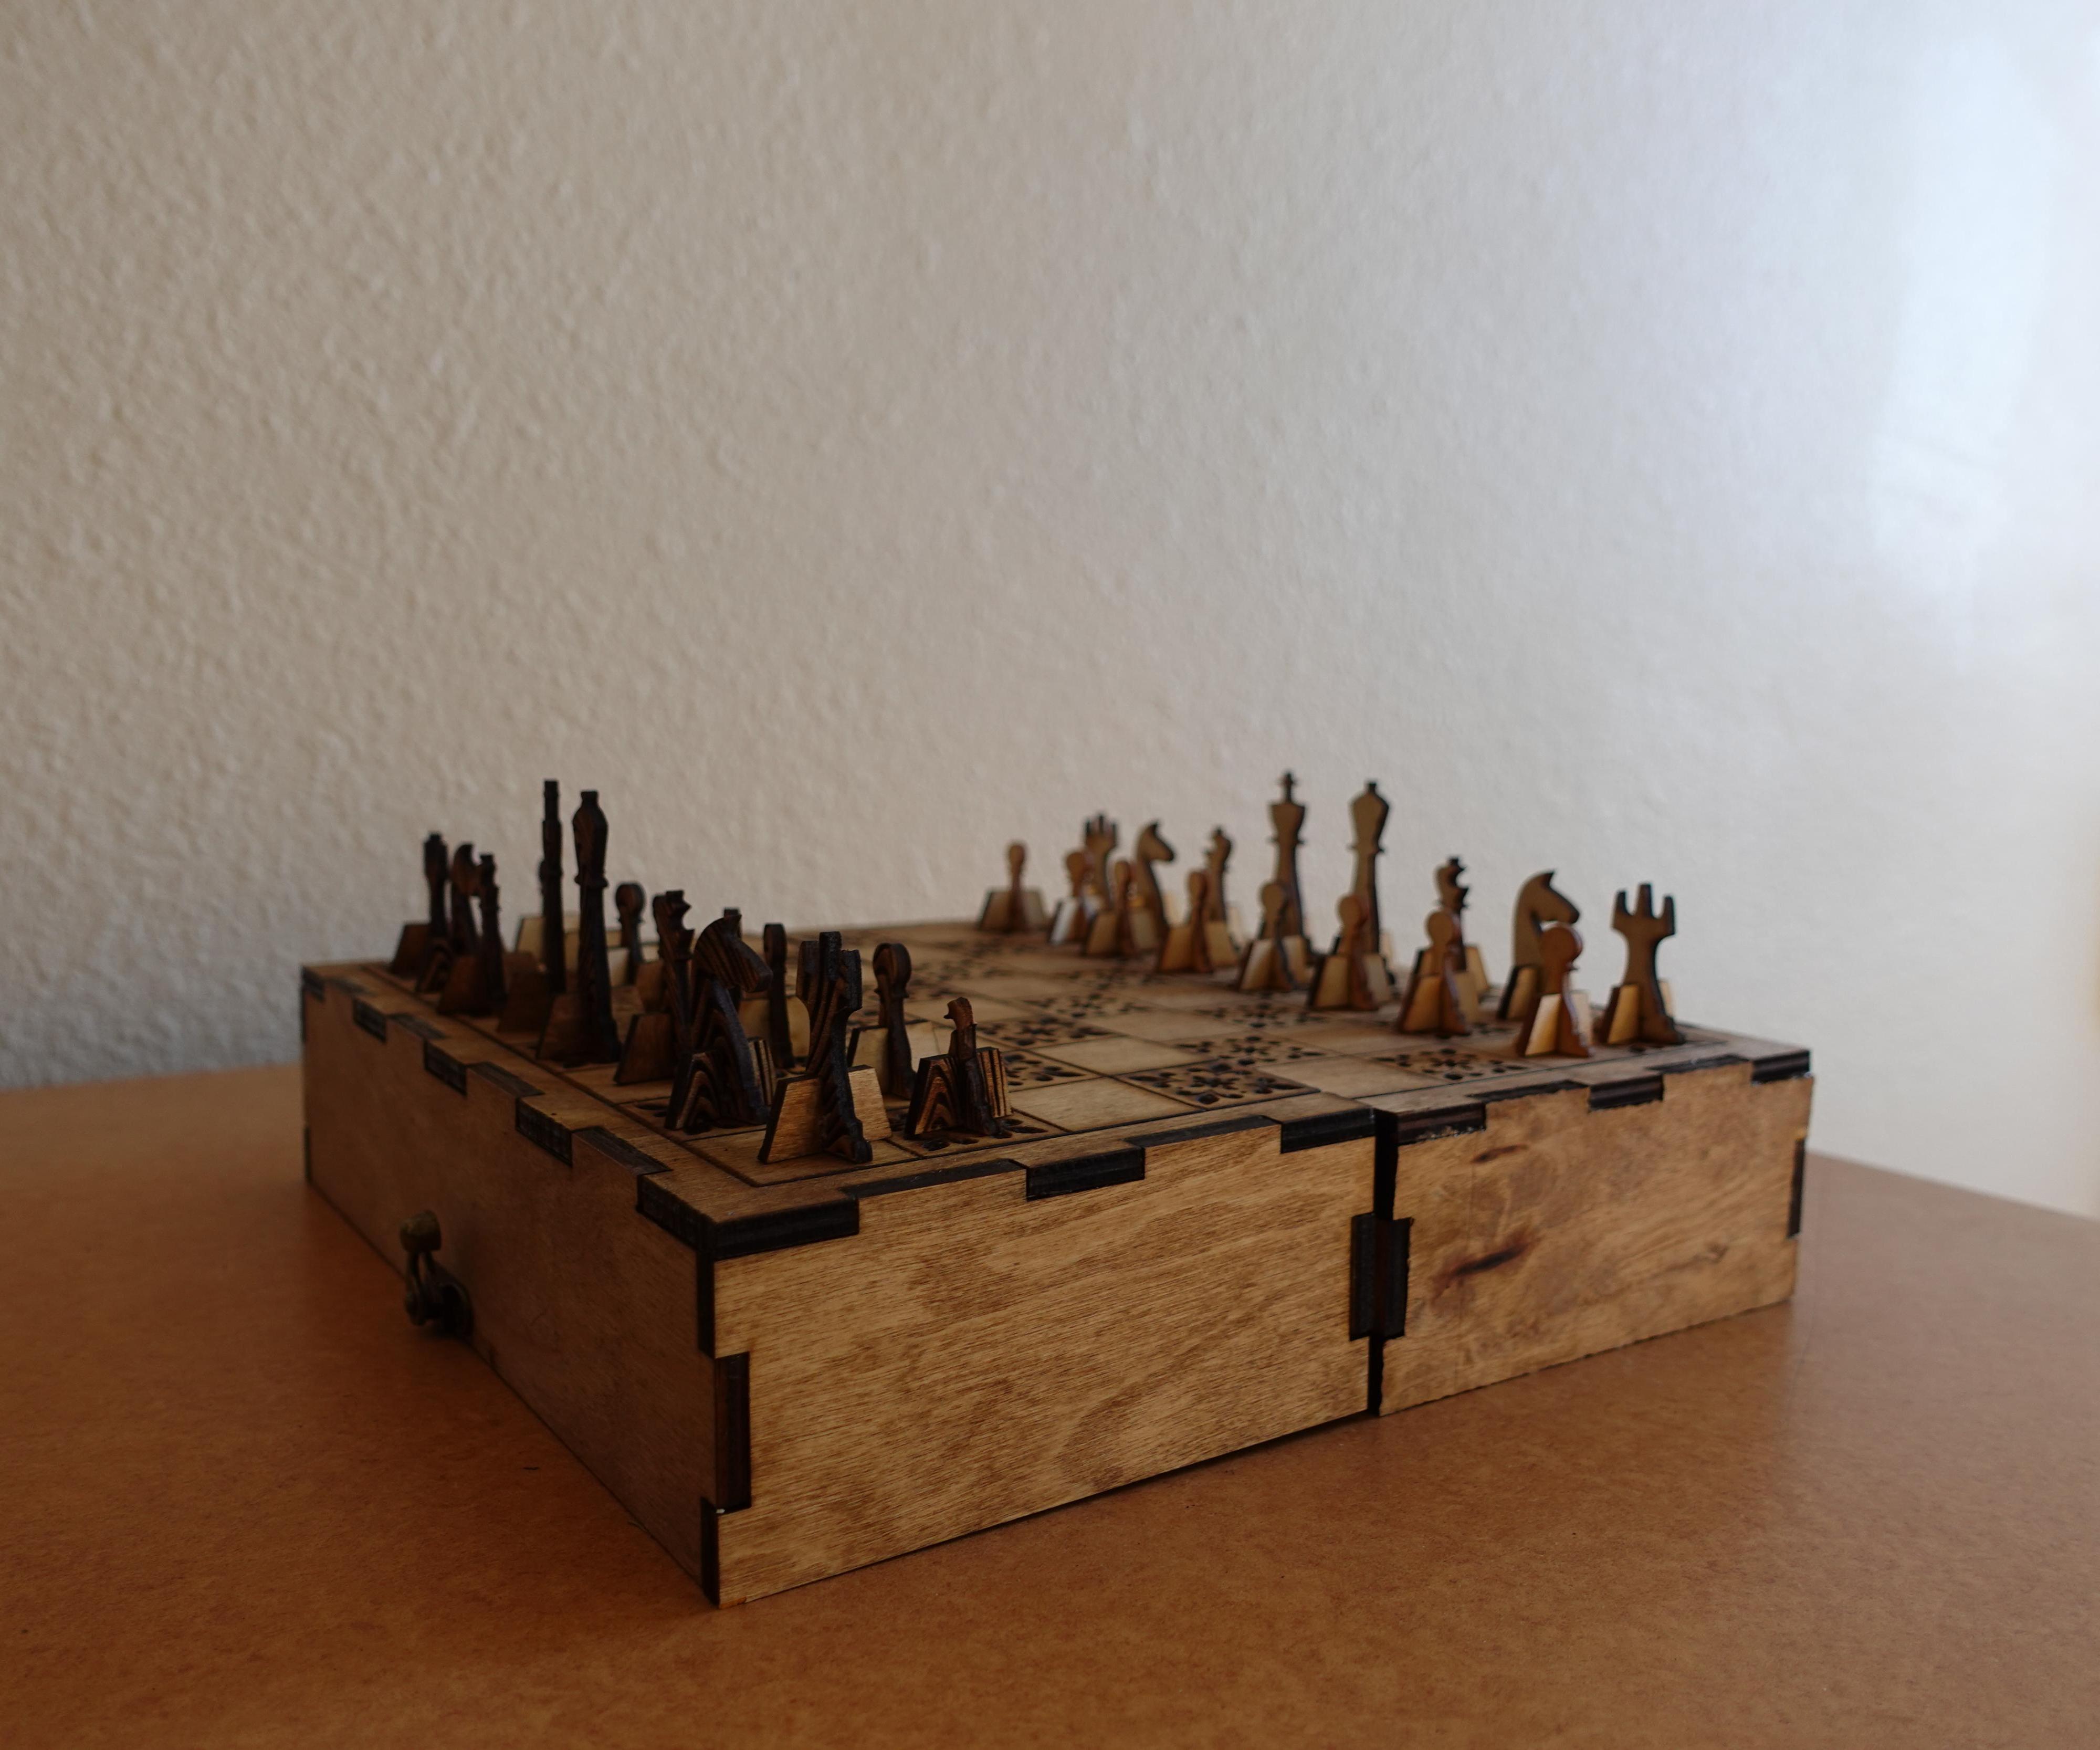 Reinventing a Chess Set: Decorative, Functional, and Portable!